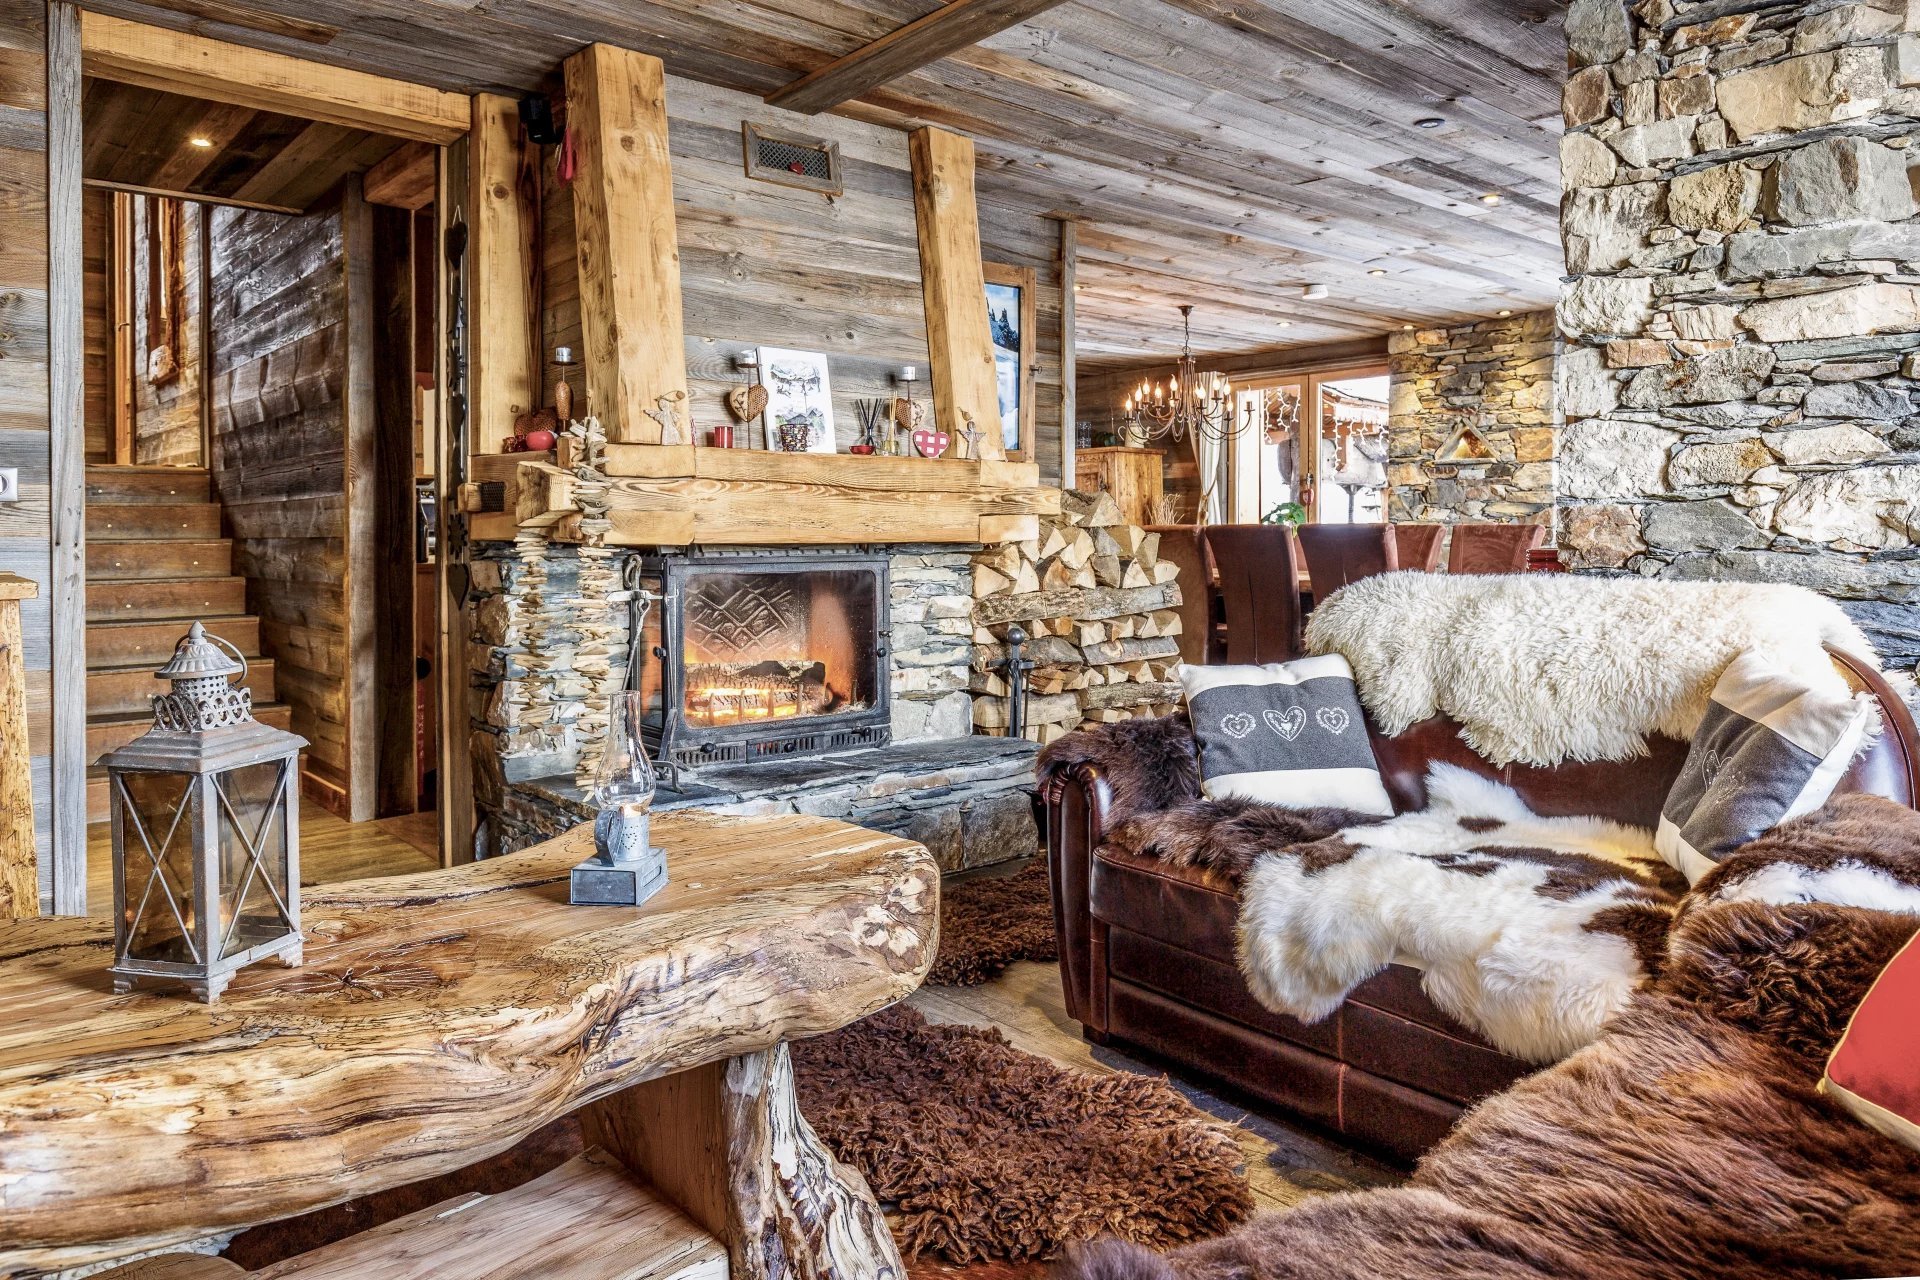 Francis+York+ Luxury Chalet in the La Plagne, French Alps 00003.jpeg